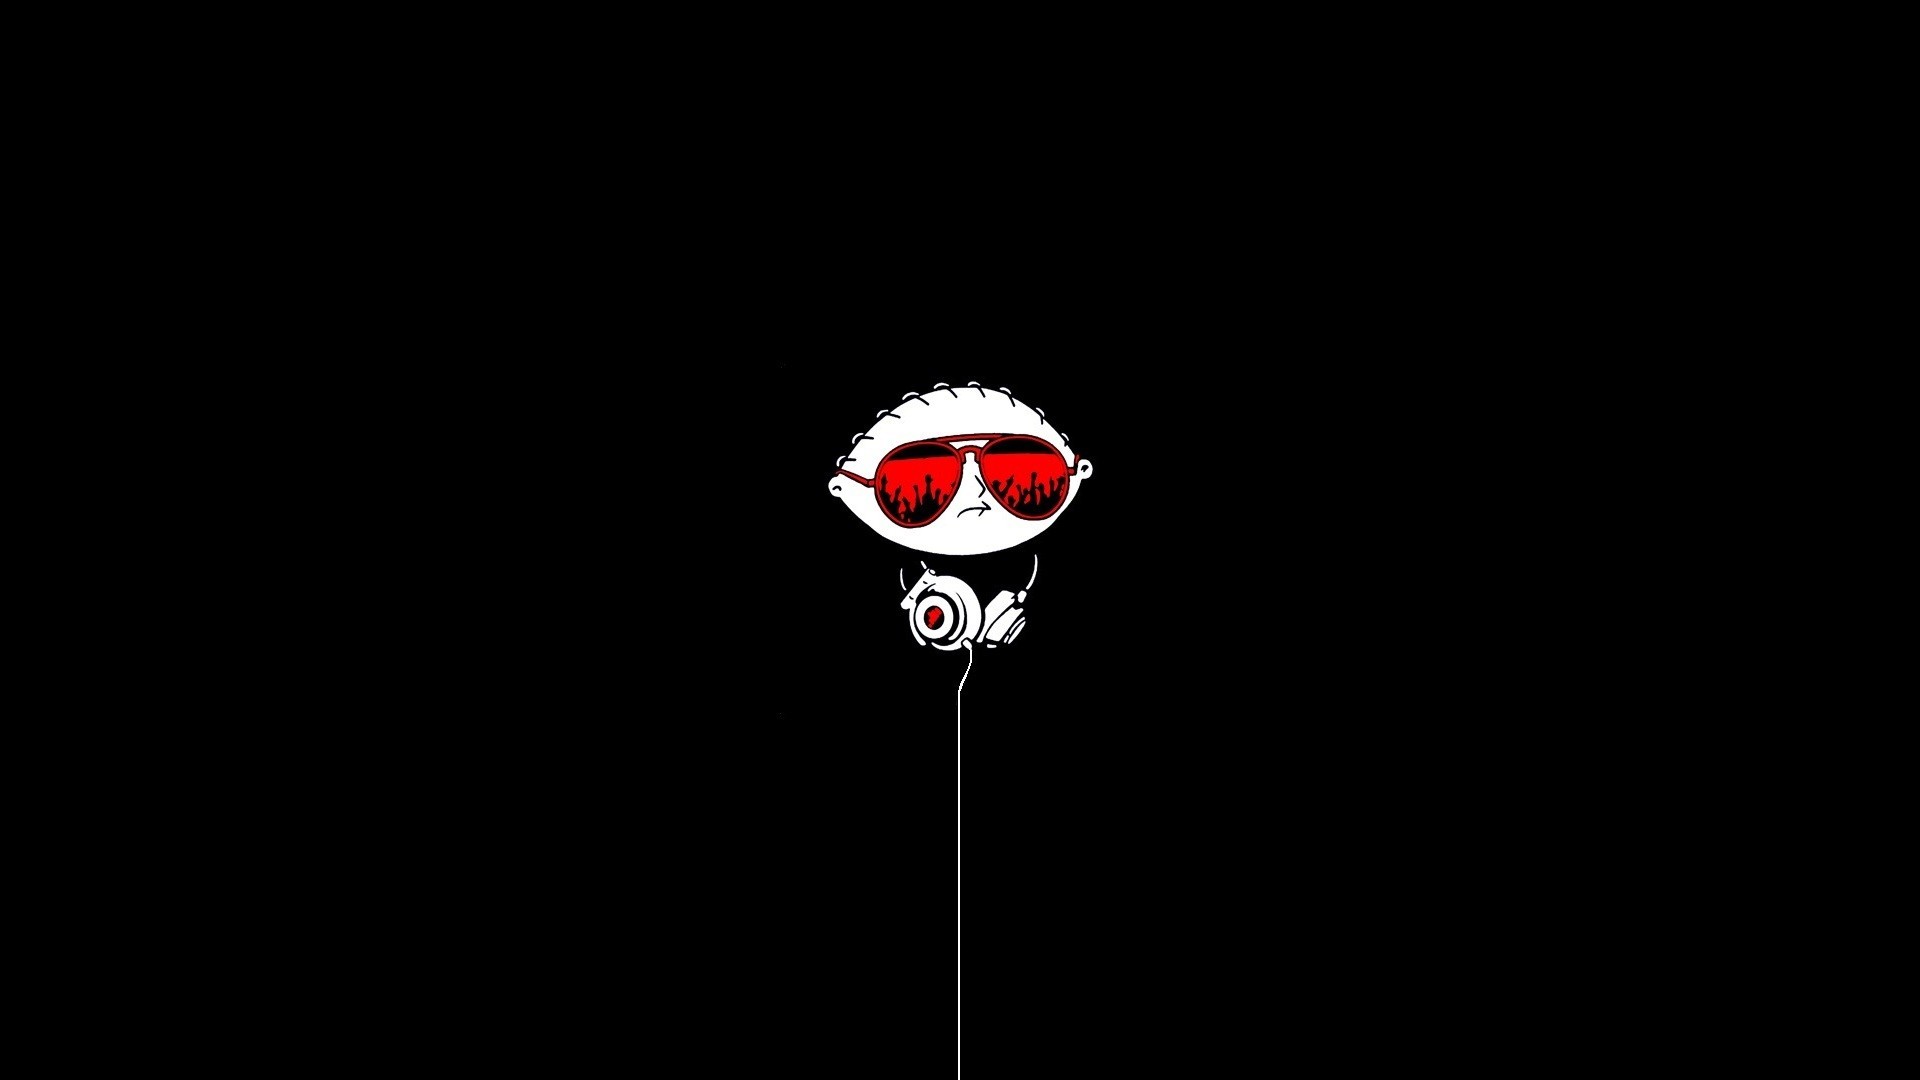 General 1920x1080 Family Guy black minimalism selective coloring cartoon TV series simple background black background headphones sunglasses Stewie Griffin